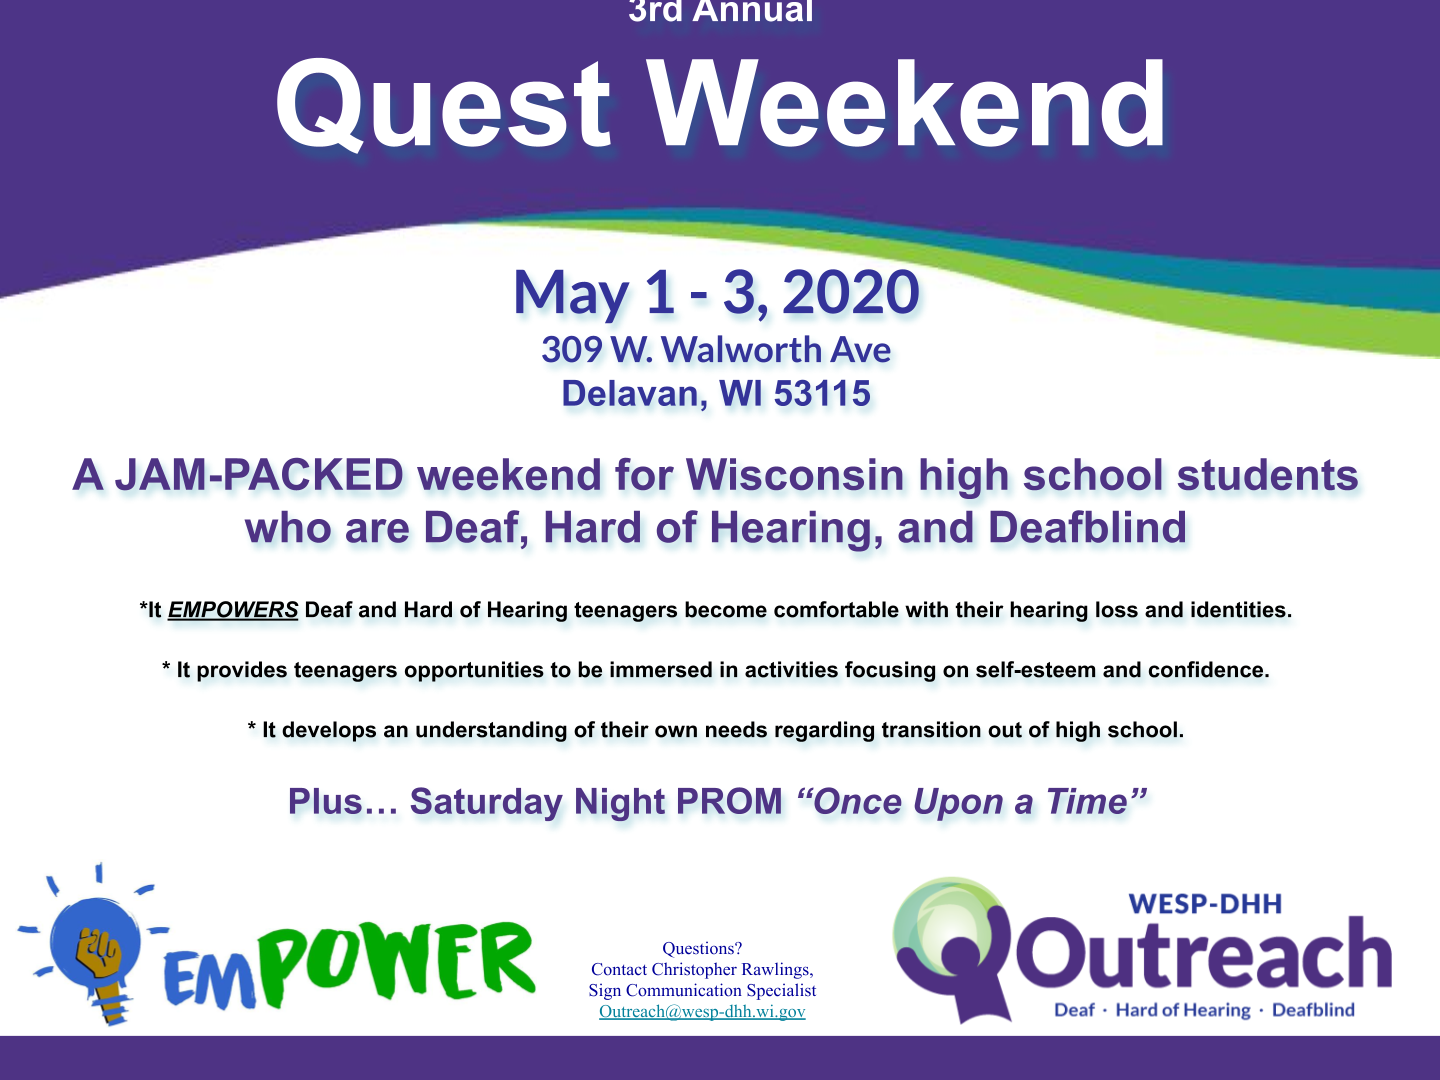 Promotional flyer for Quest Weekend, with the text that is included below.